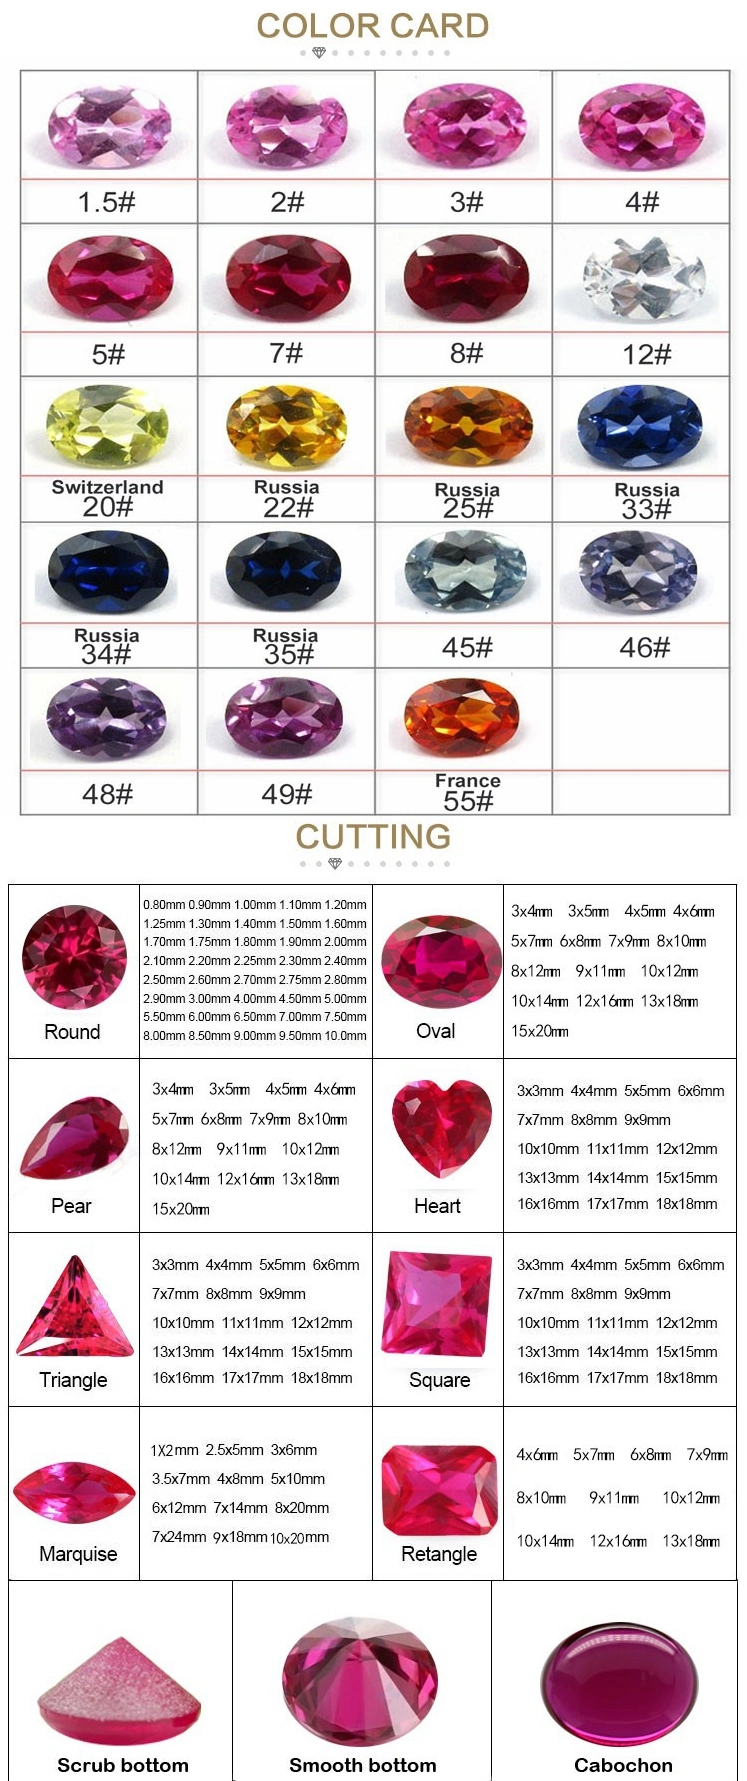 The Ruby Ball Stone Faceted No Hold Red Corundum Synthetic Gemstone